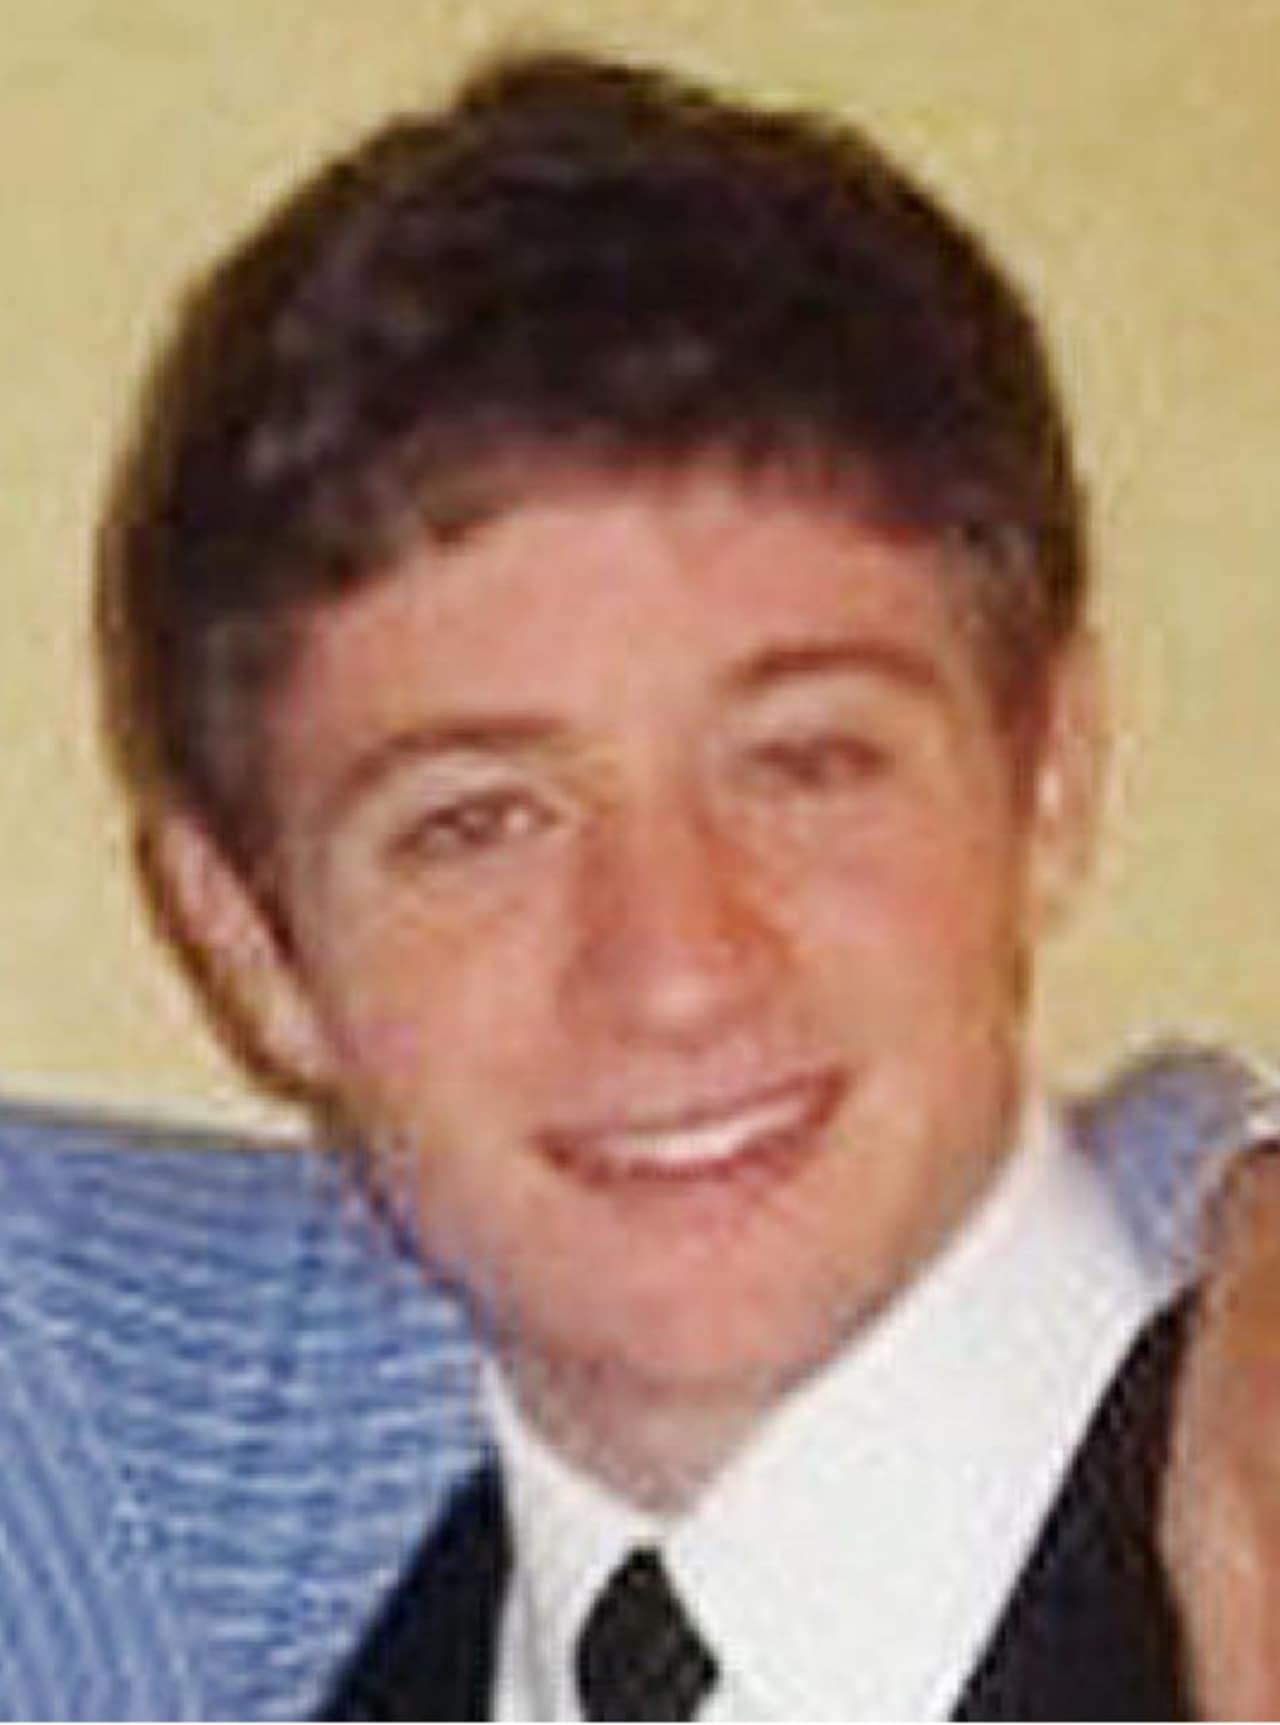 Evan Lieberman, 19, of Chappaqua died in a June, 2011 distracted driving accident.